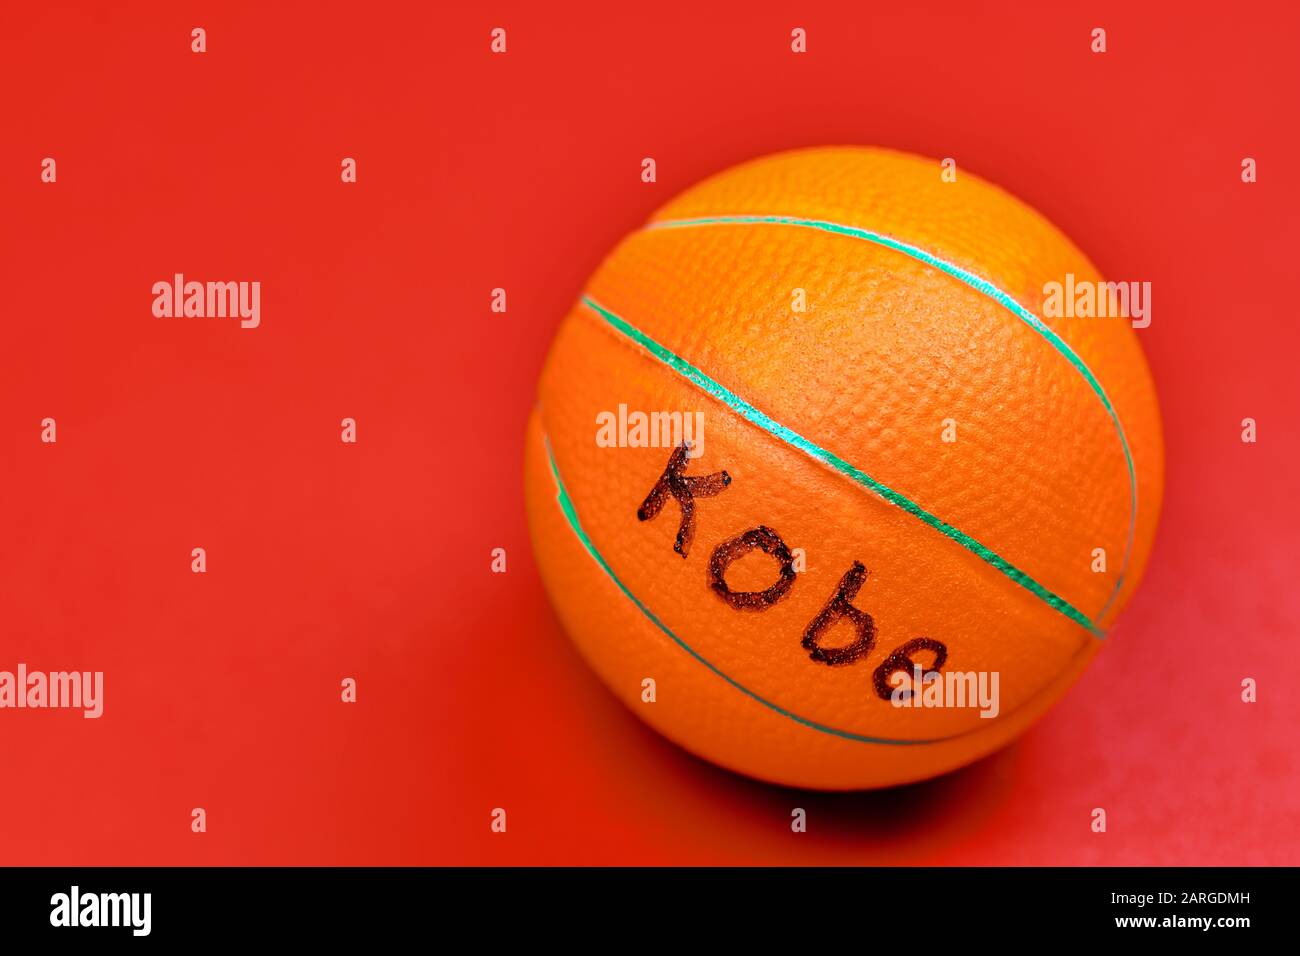 Basketball ball with KOBE text, red background, copy space. Famous basketball player concept. Stock Photo